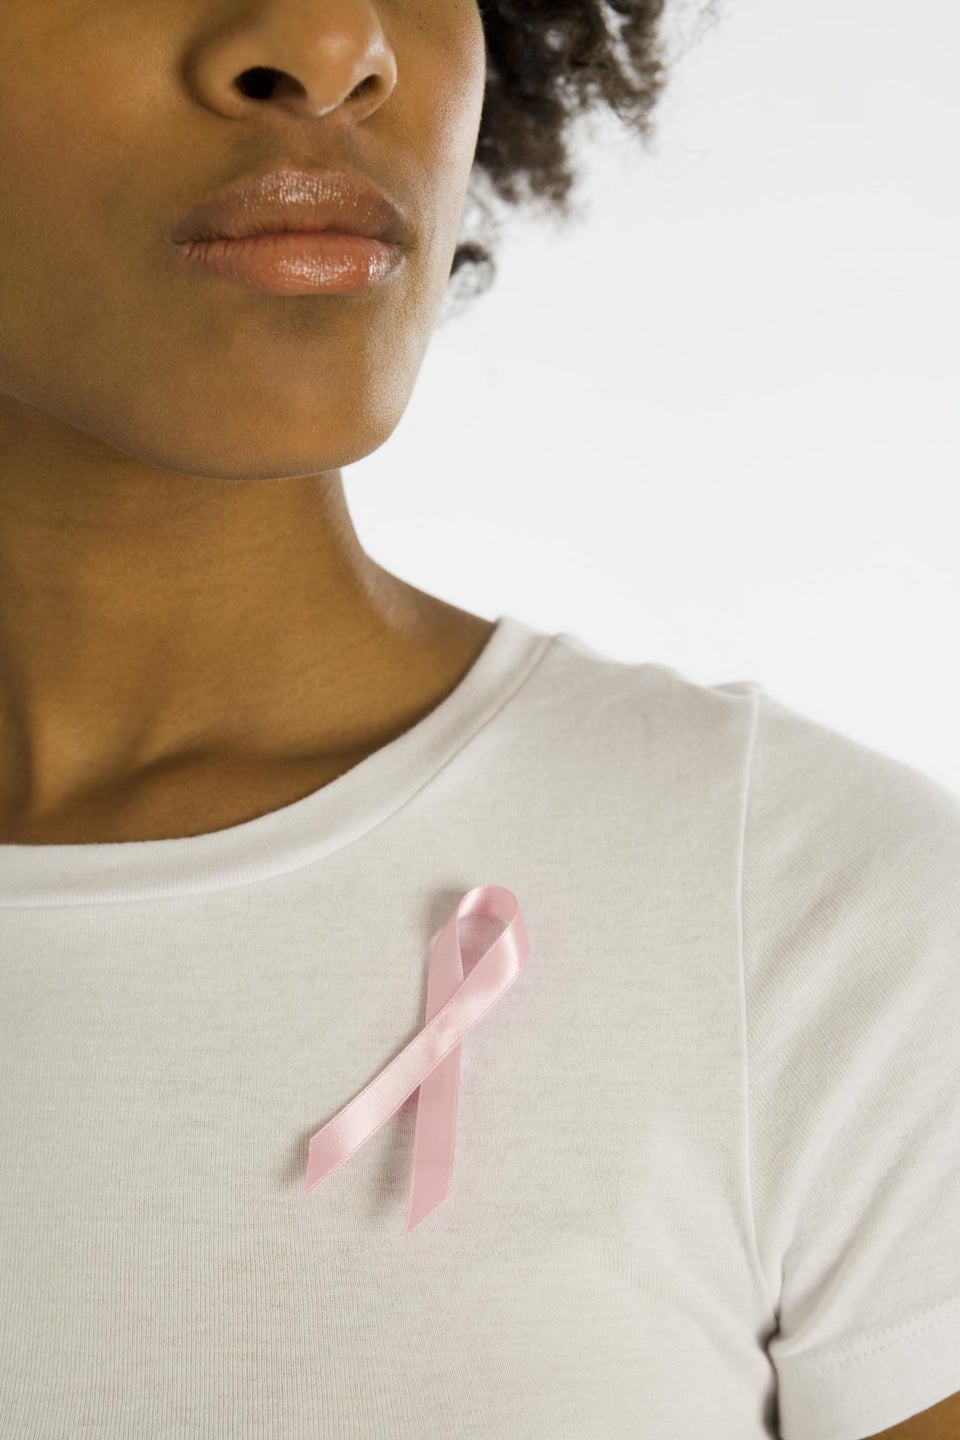 What Race Has to Do With Breast Cancer